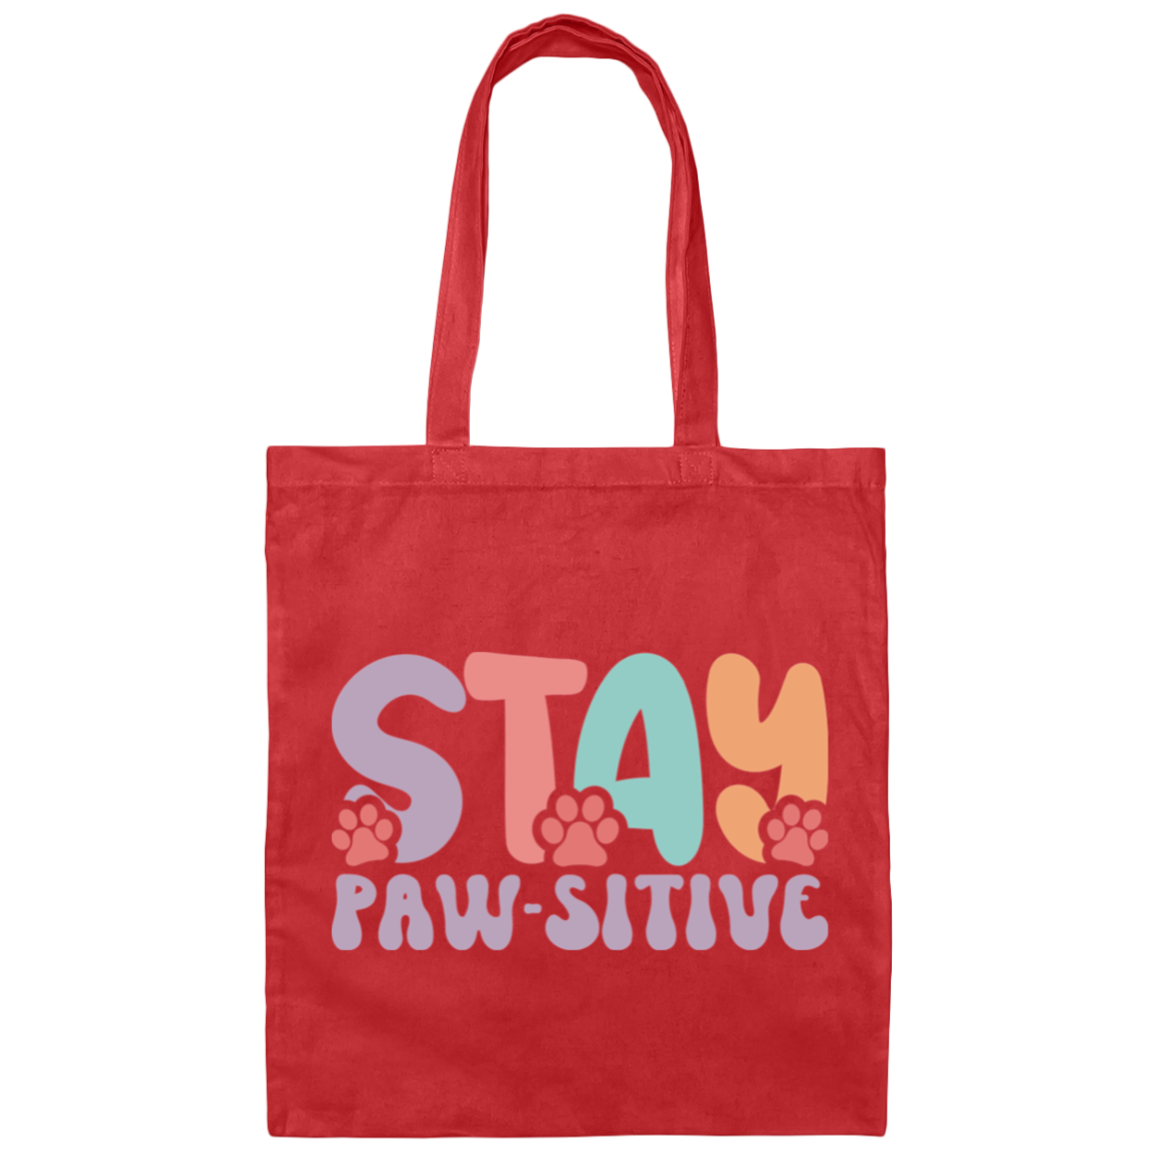 Stay Pawsitive Dog Rescue Canvas Tote Bag